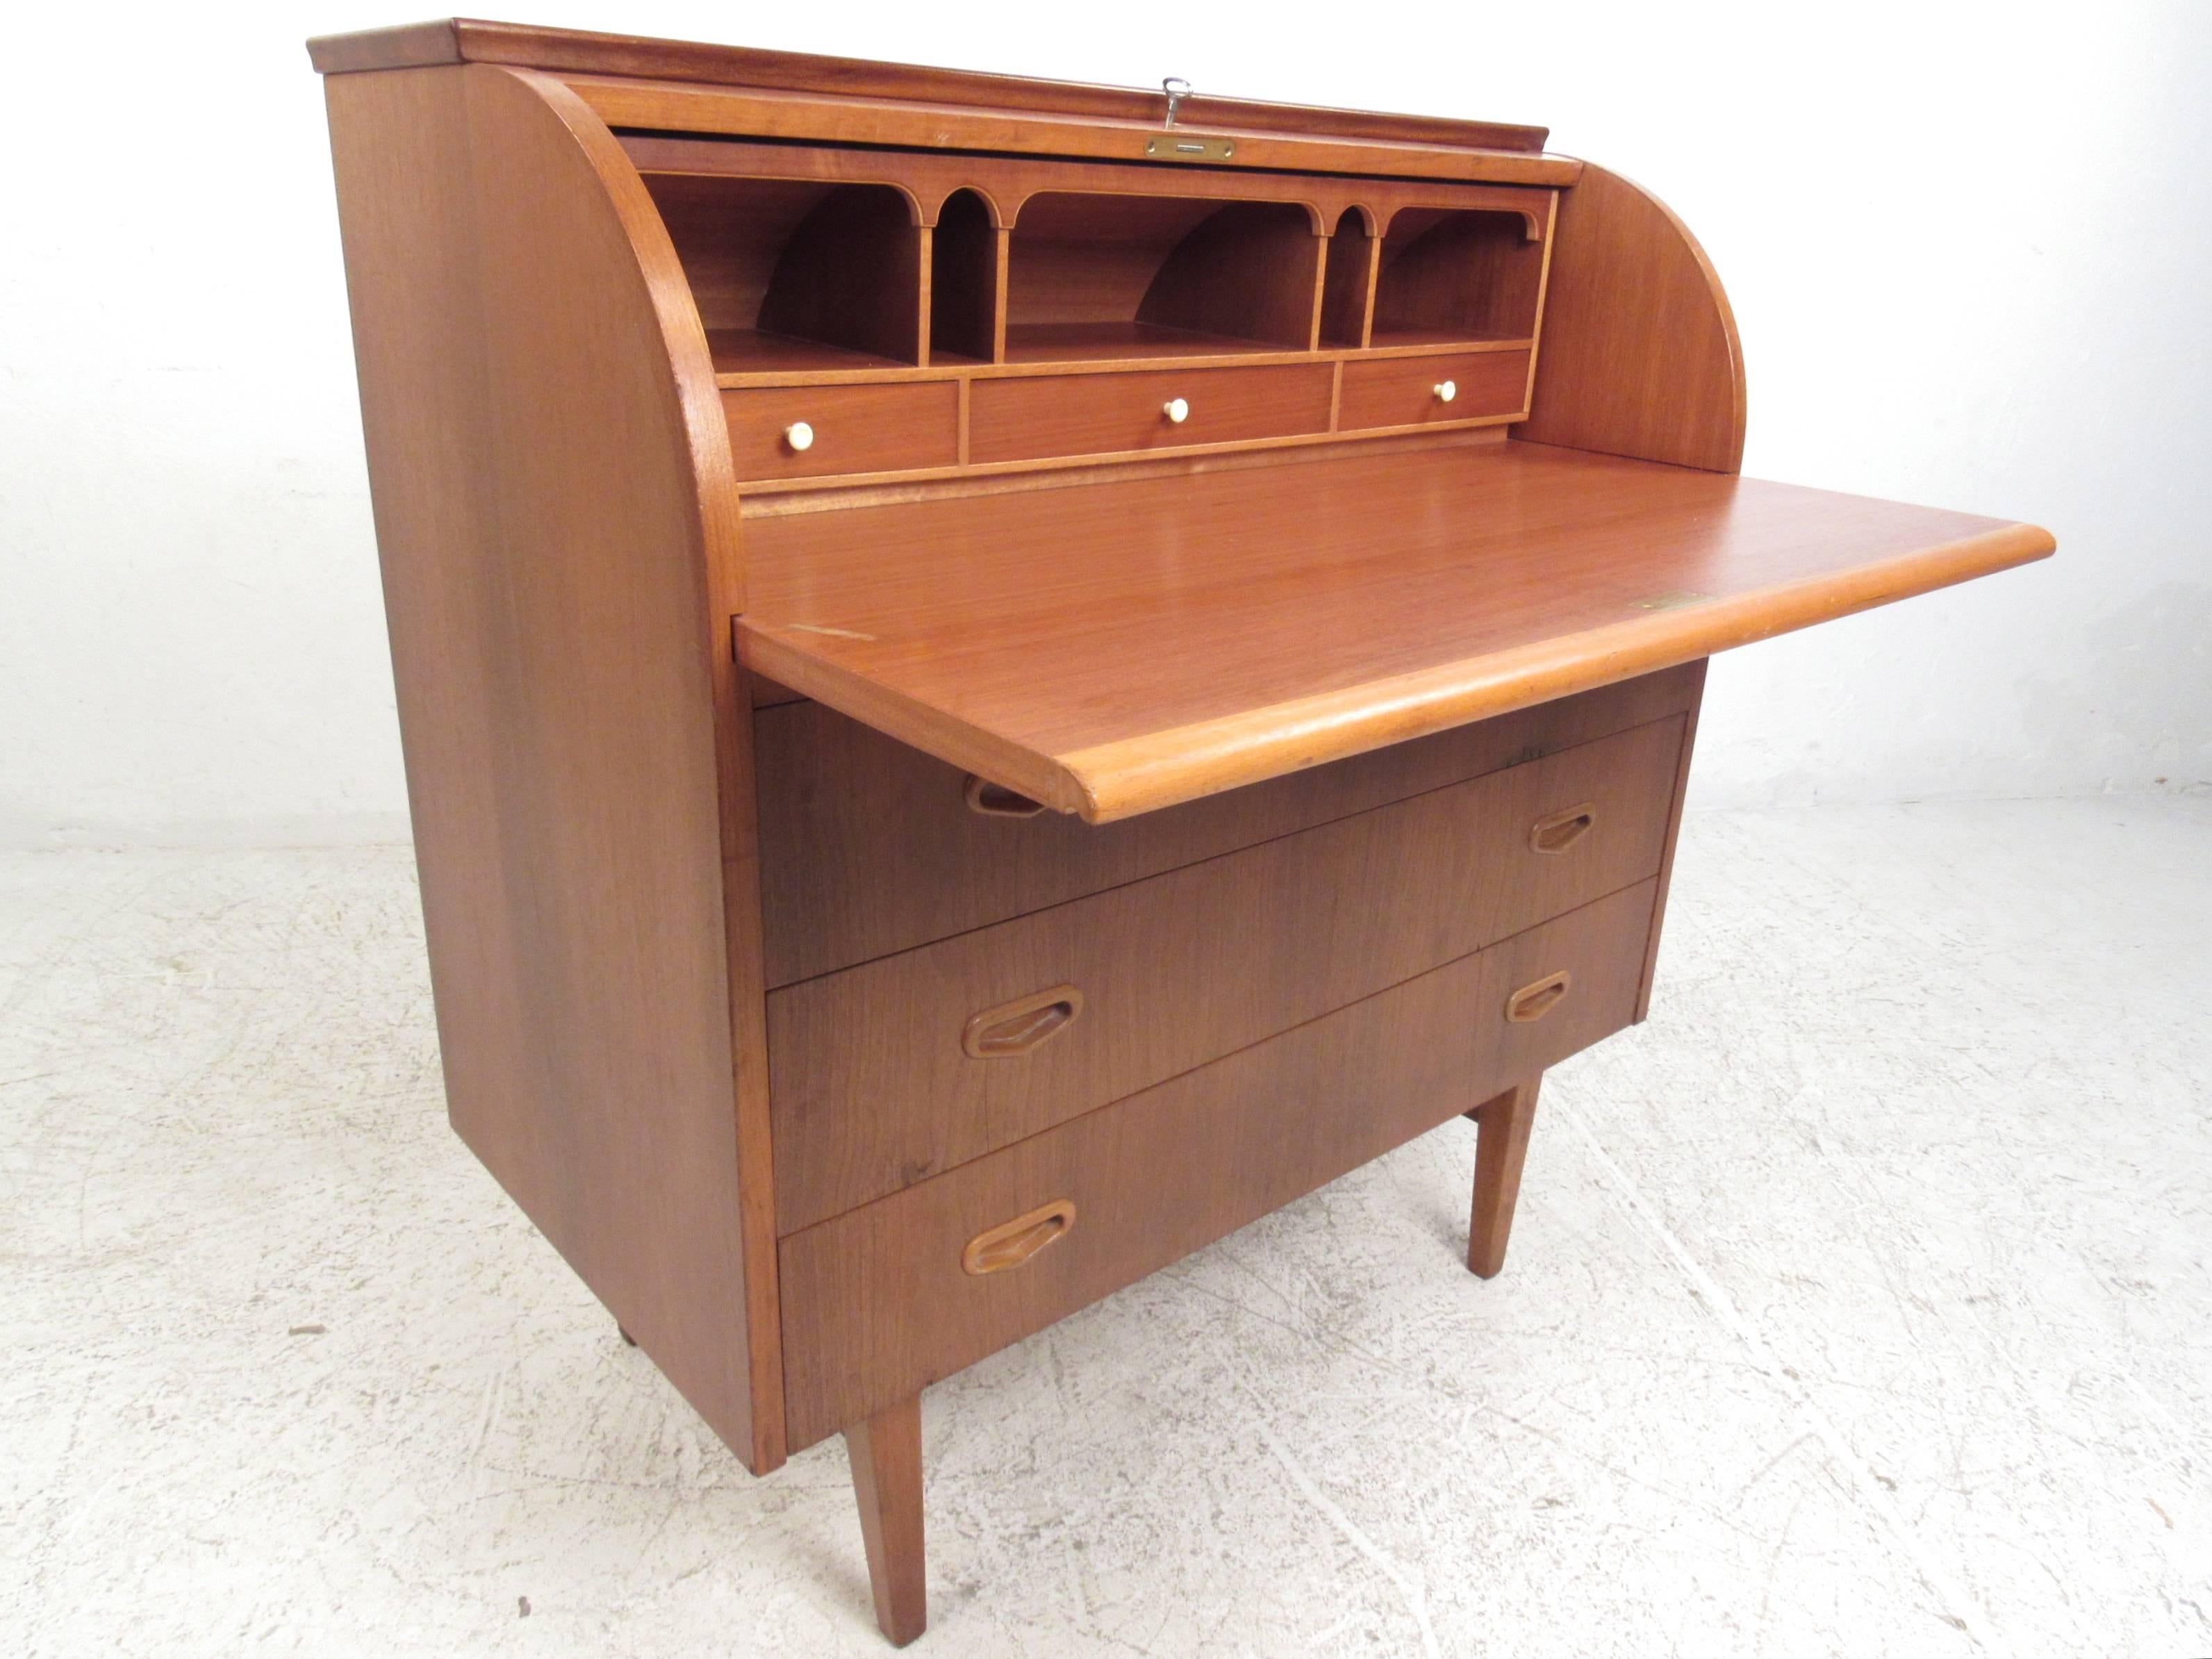 This vintage teak roll top secretary desk provides a stylish yet compact workspace in any setting. Three spacious drawers feature carved teak handles, while the locking roll-top compartment features a pull-out writing table and multiple shelves for